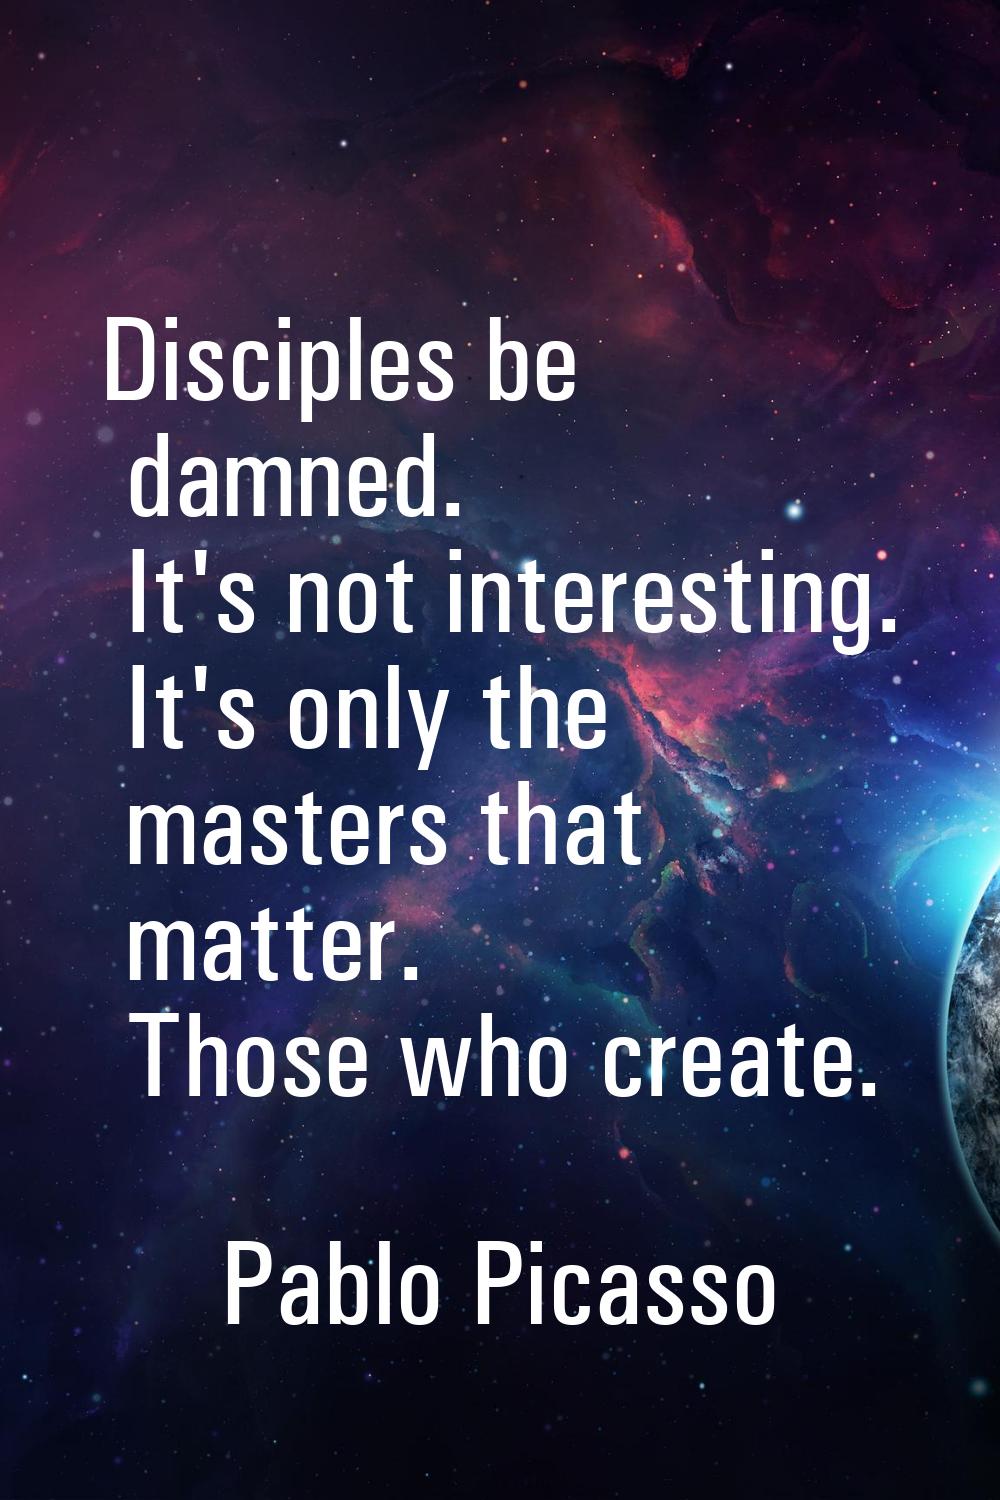 Disciples be damned. It's not interesting. It's only the masters that matter. Those who create.